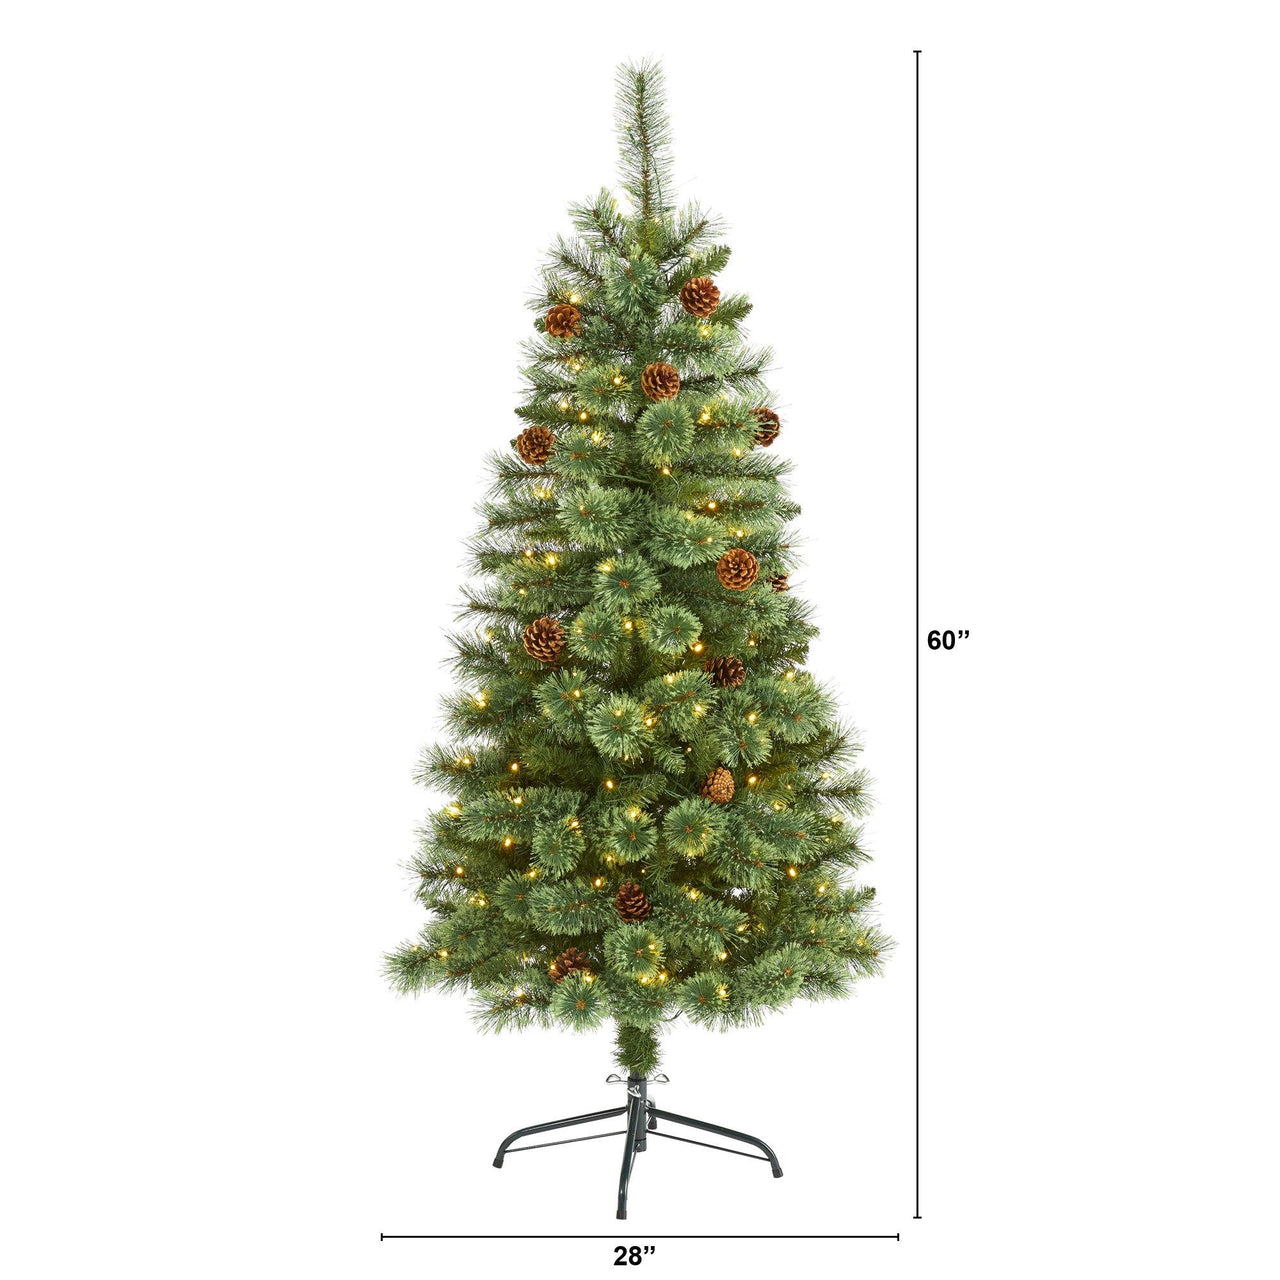 5’ White Mountain Pine Artificial Christmas Tree with 200 Clear LED Lights and Pine Cones - The Fox Decor